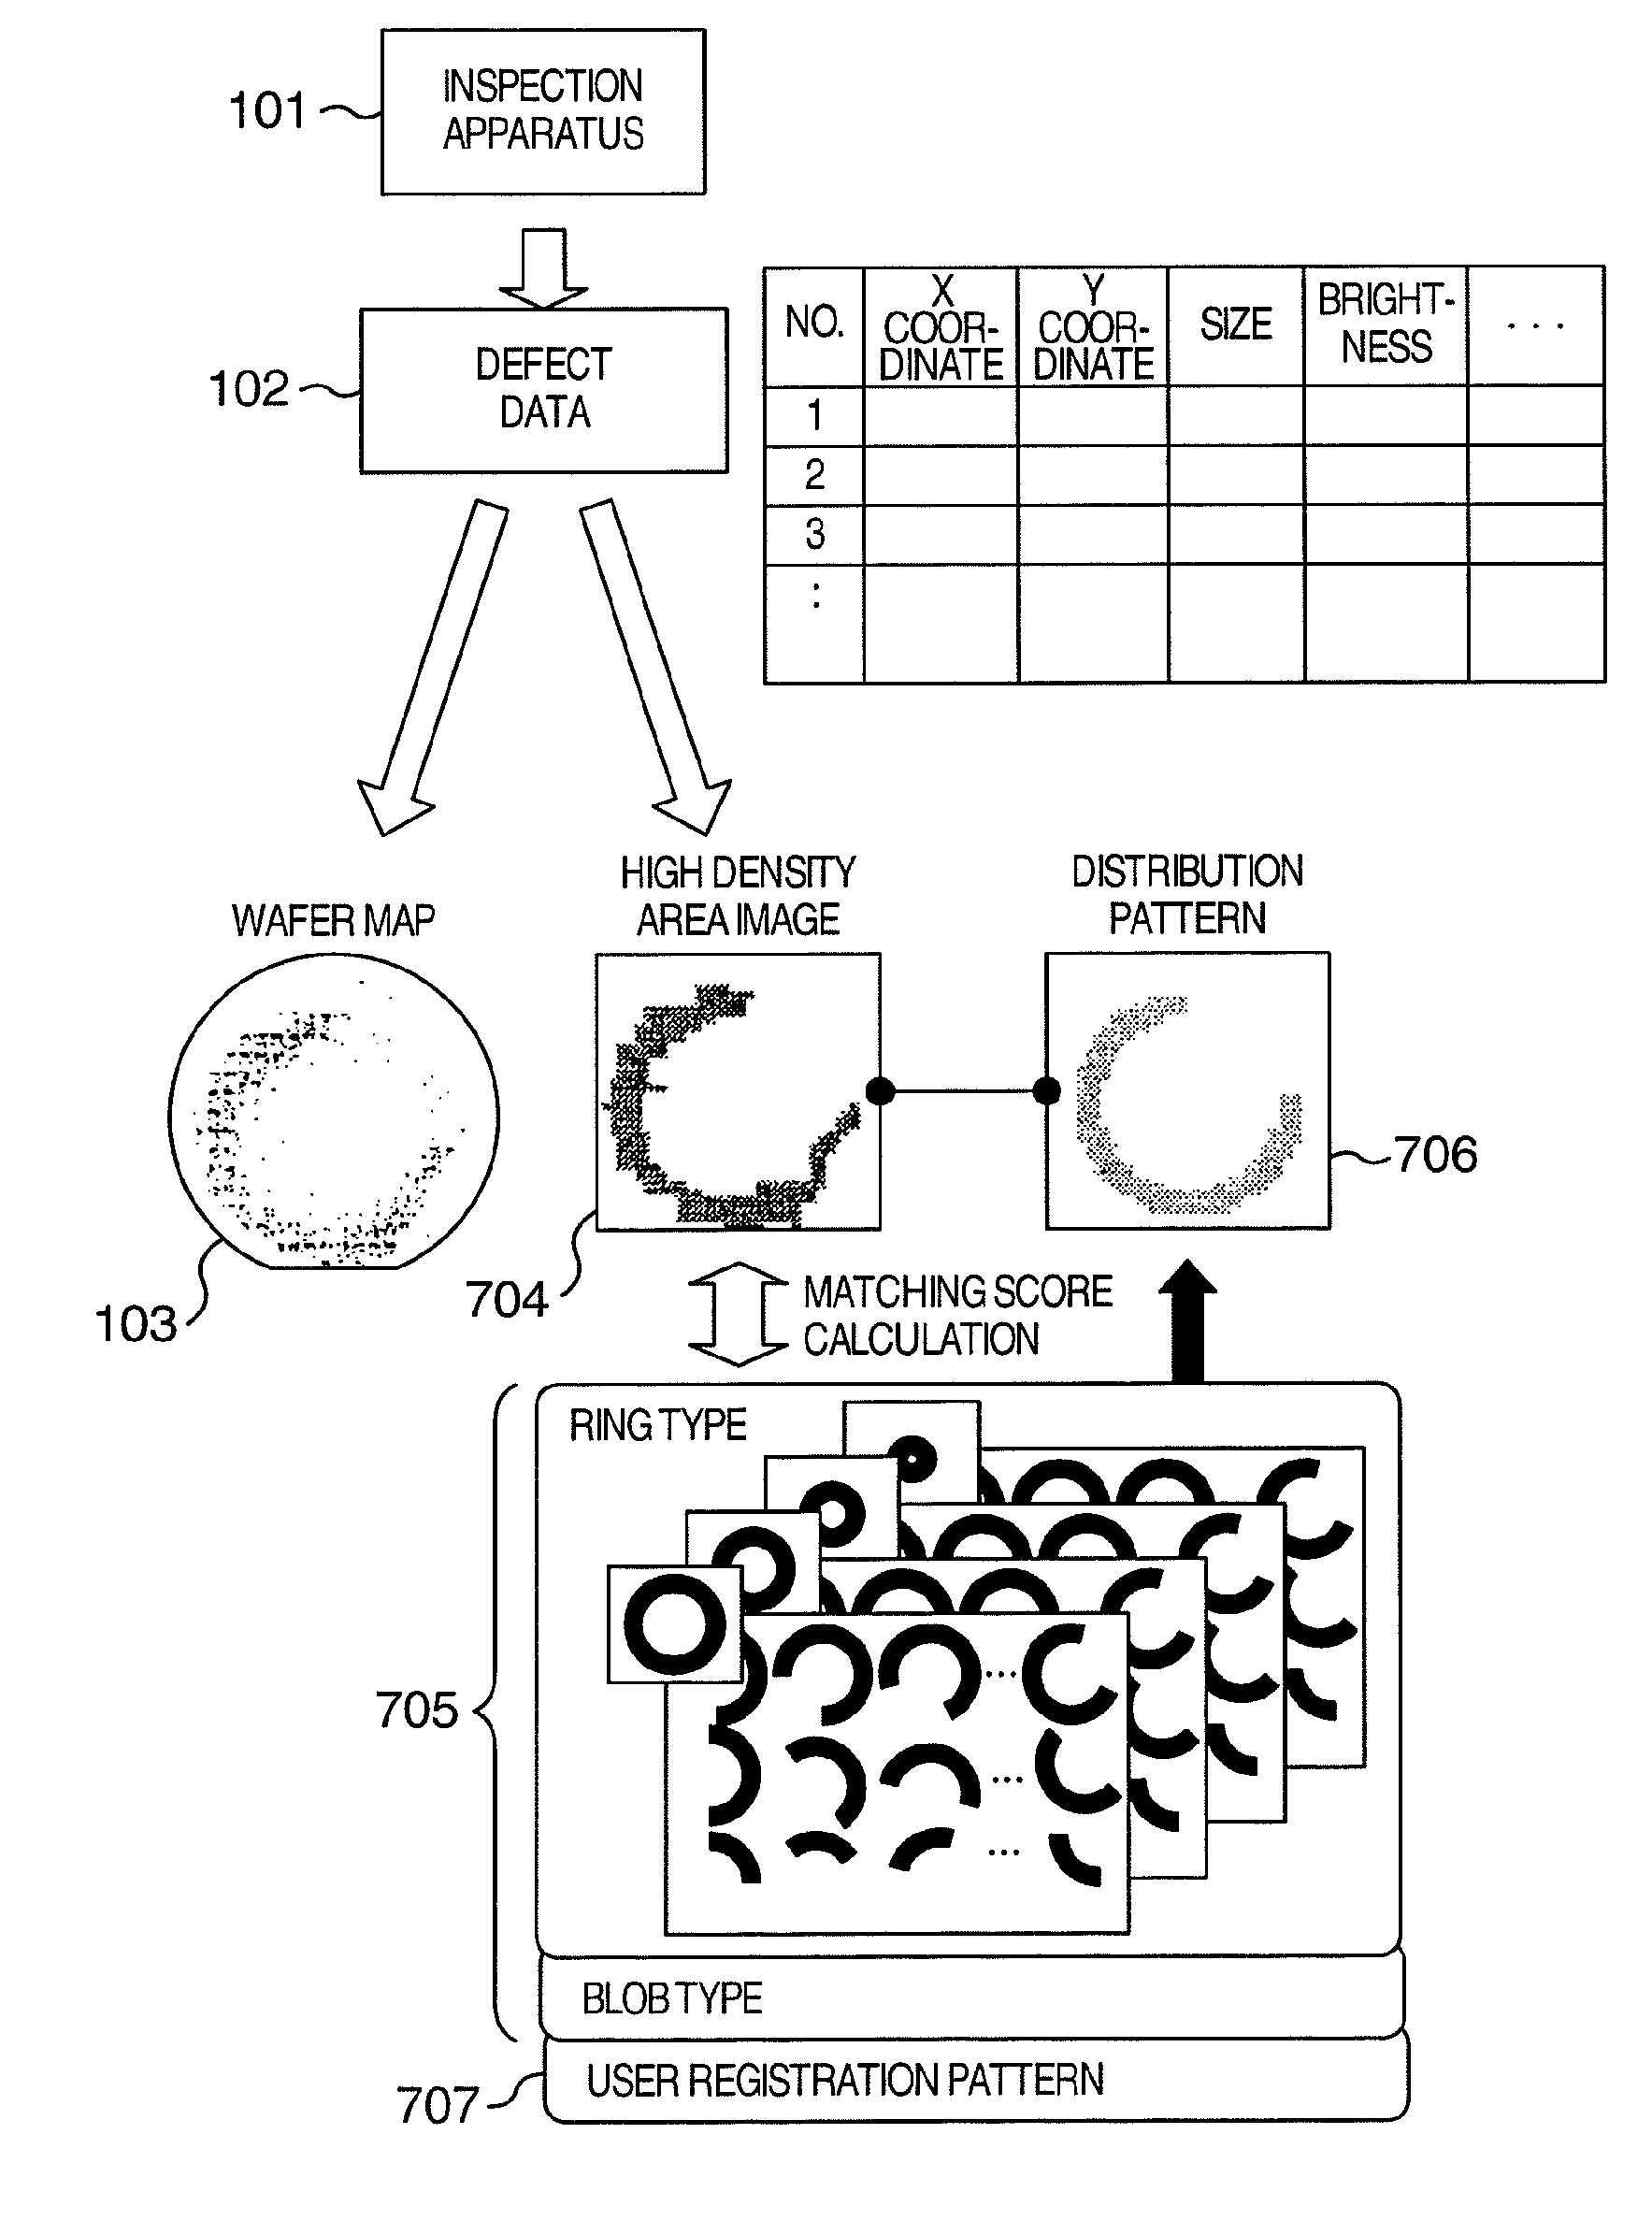 Method and apparatus for analyzing defect data and a review system